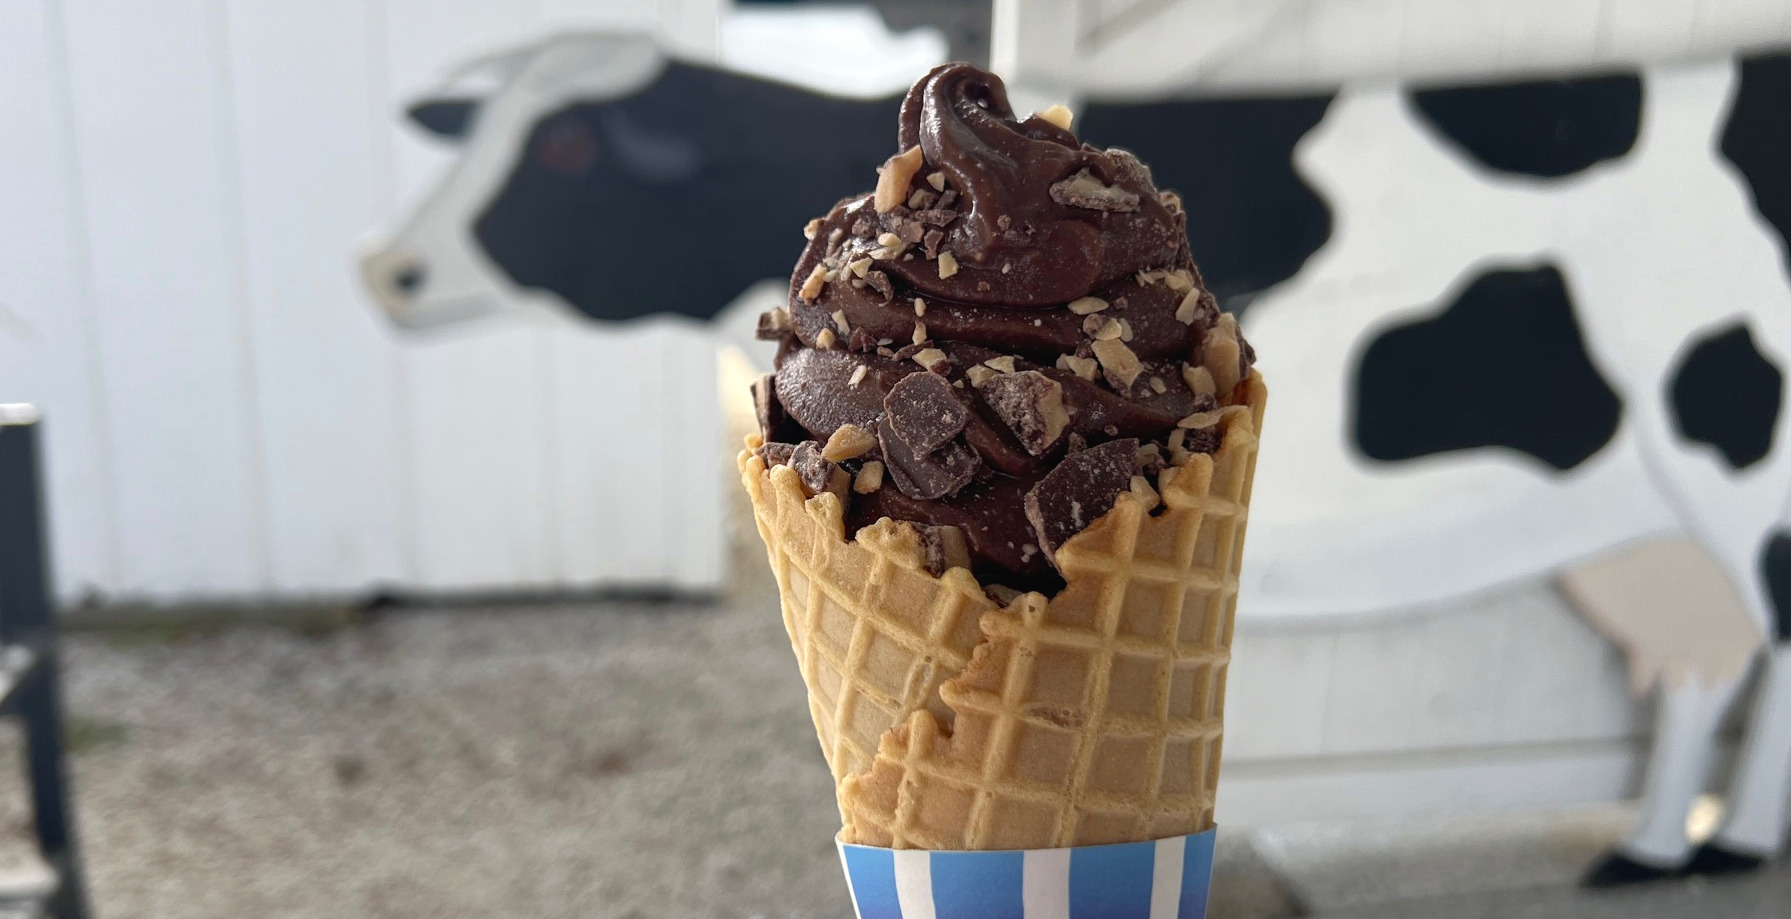 A chocolate ice cream cone from Sidney Dairy Barn.